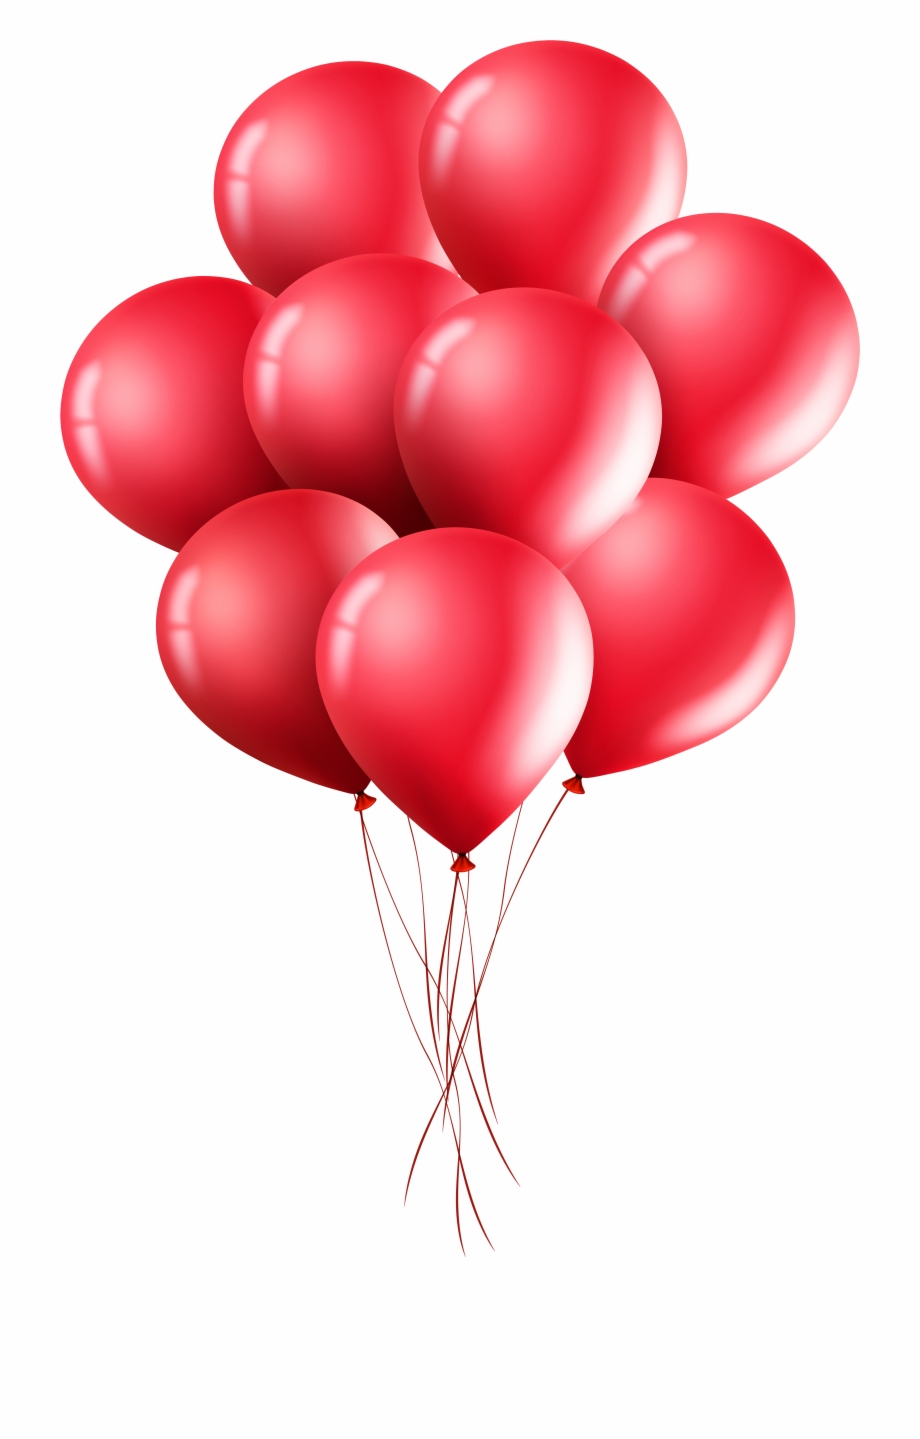 Clipart balloons red.